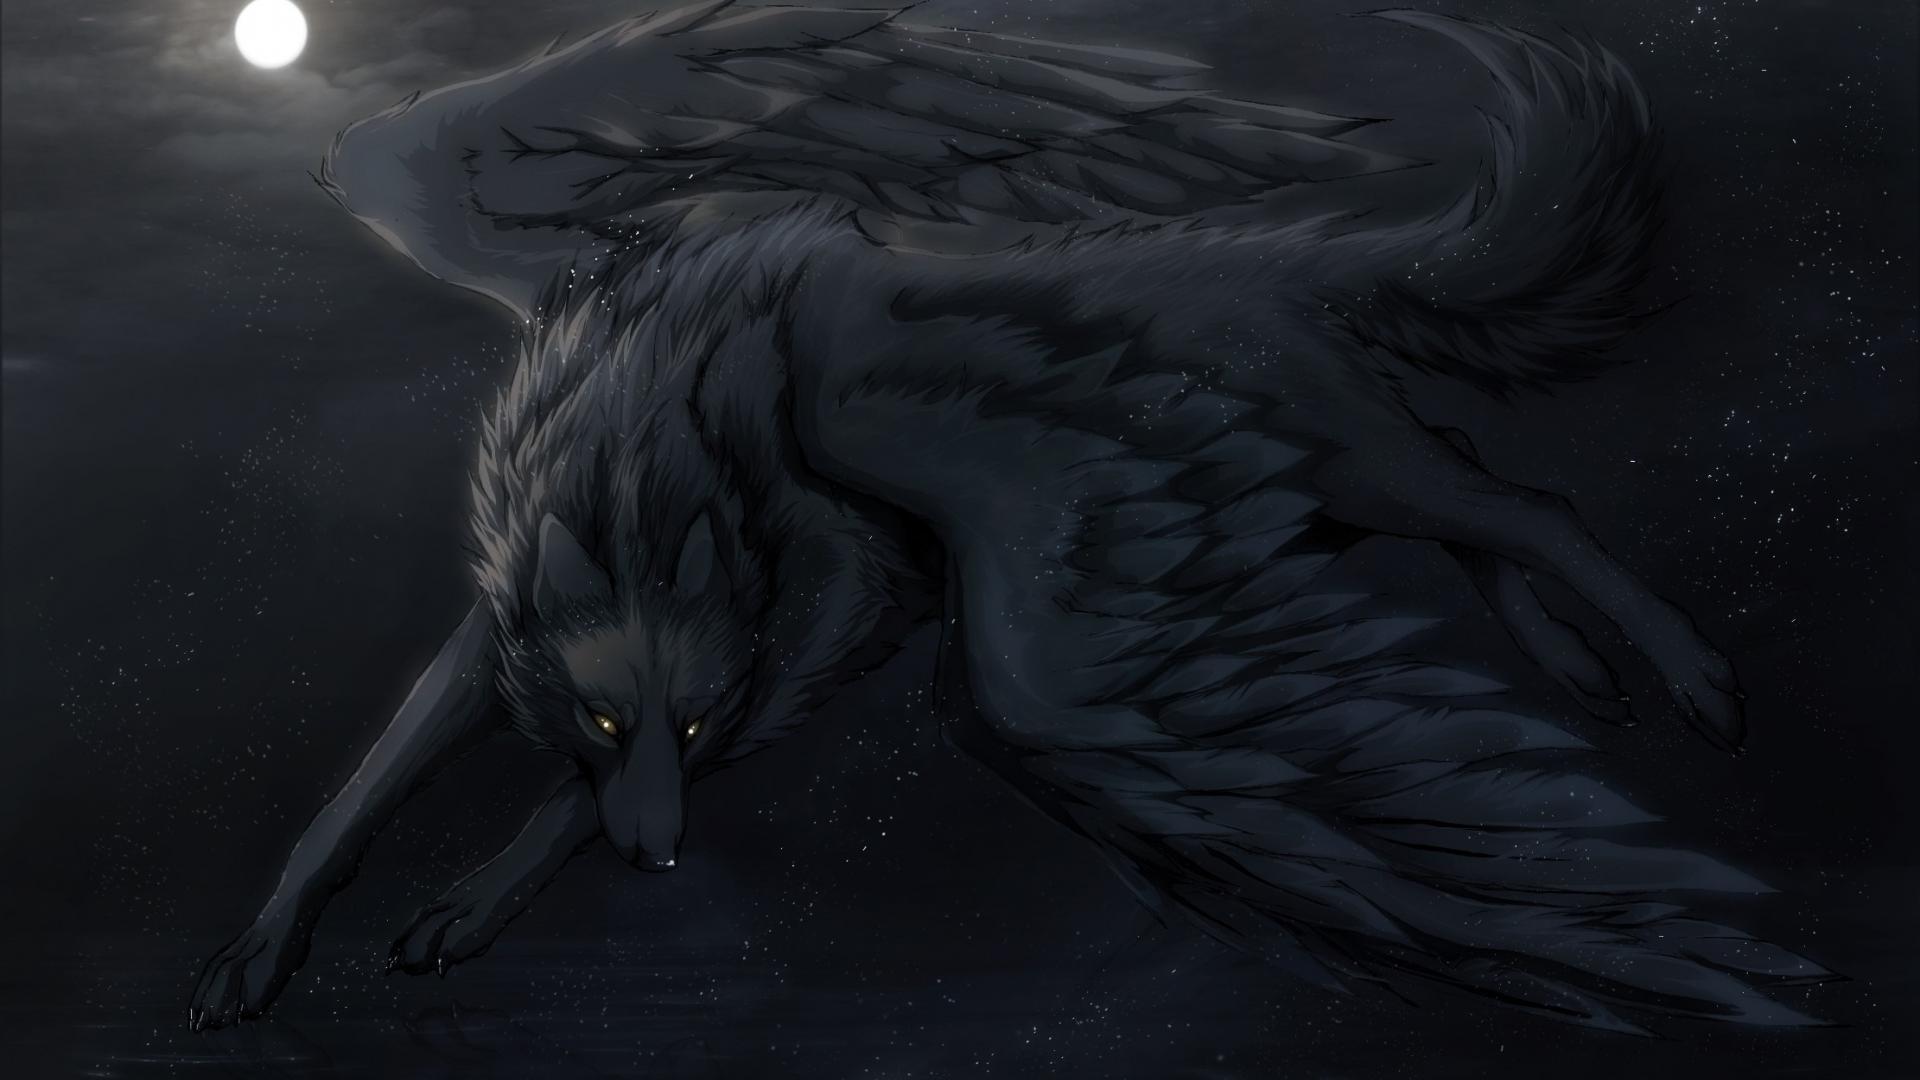 Winged Wolves - Winged Wolves Photo (16237143) - Fanpop